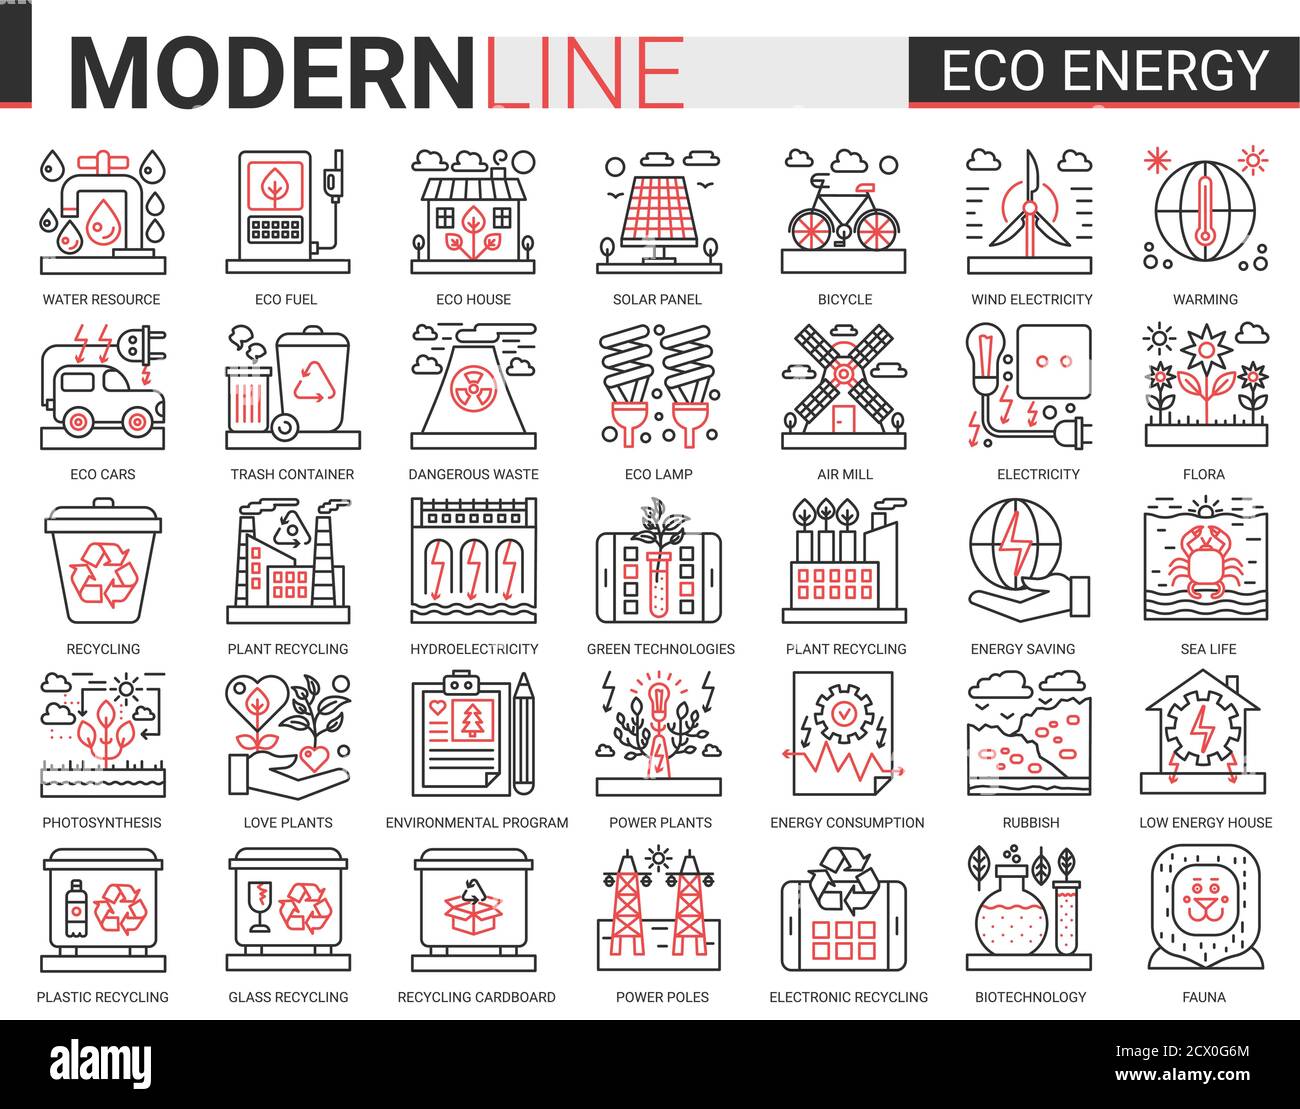 Eco energy complex line icons vector illustration set of ecology problems linear symbols, environmental ecosystem protection and green waste recycling technology. Stock Vector